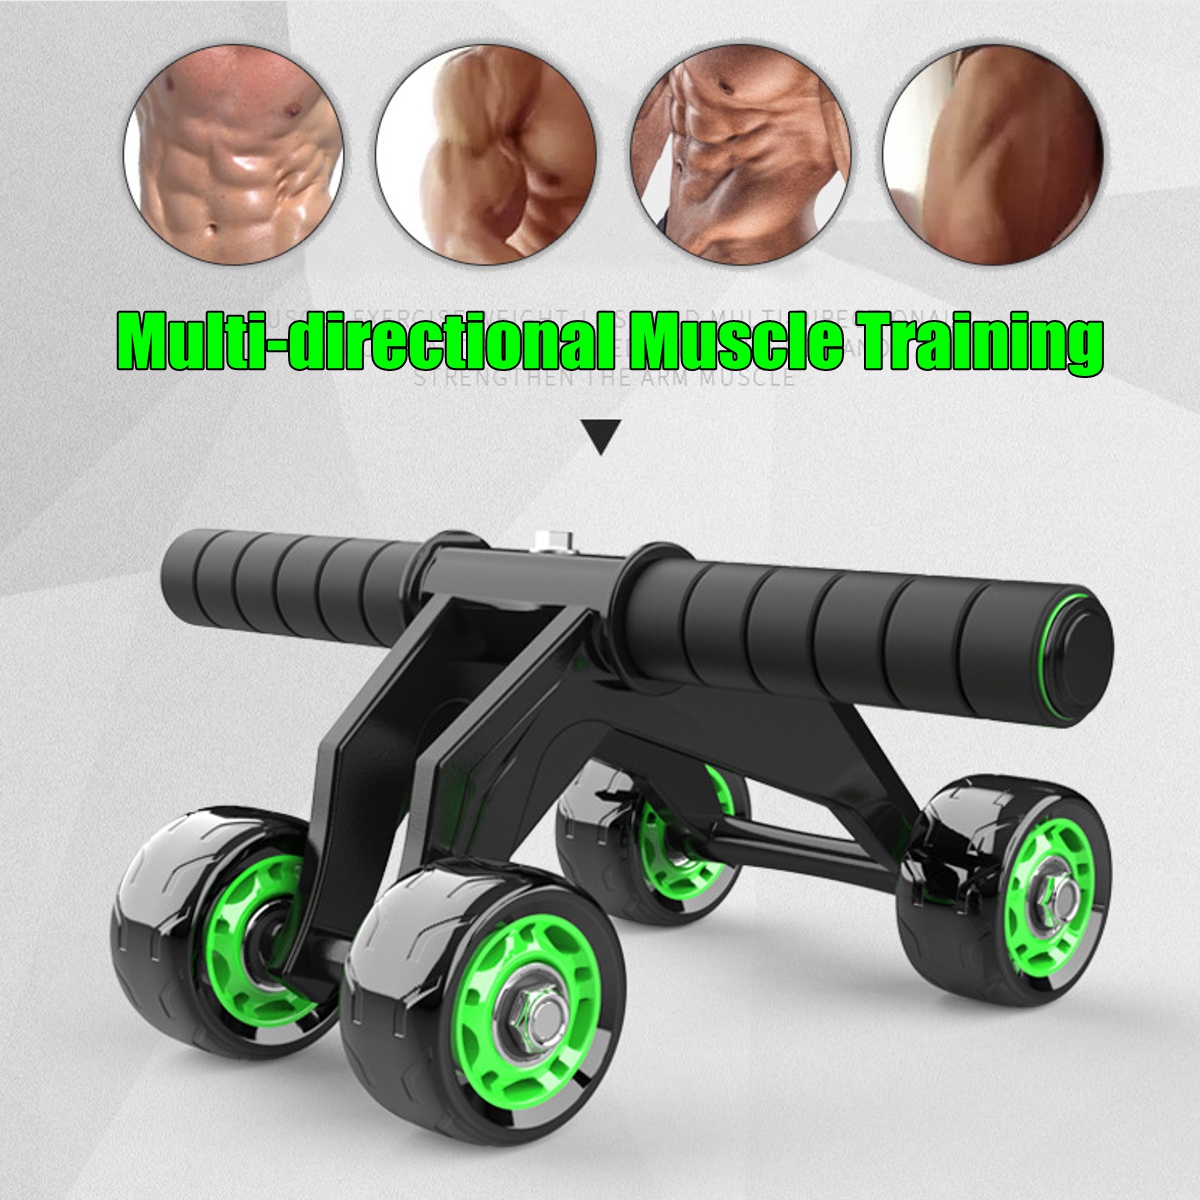 KALOAD 4 Wheel ABS Roller Wheel Sports Fitness Gym Exercise Stretch Wasit 